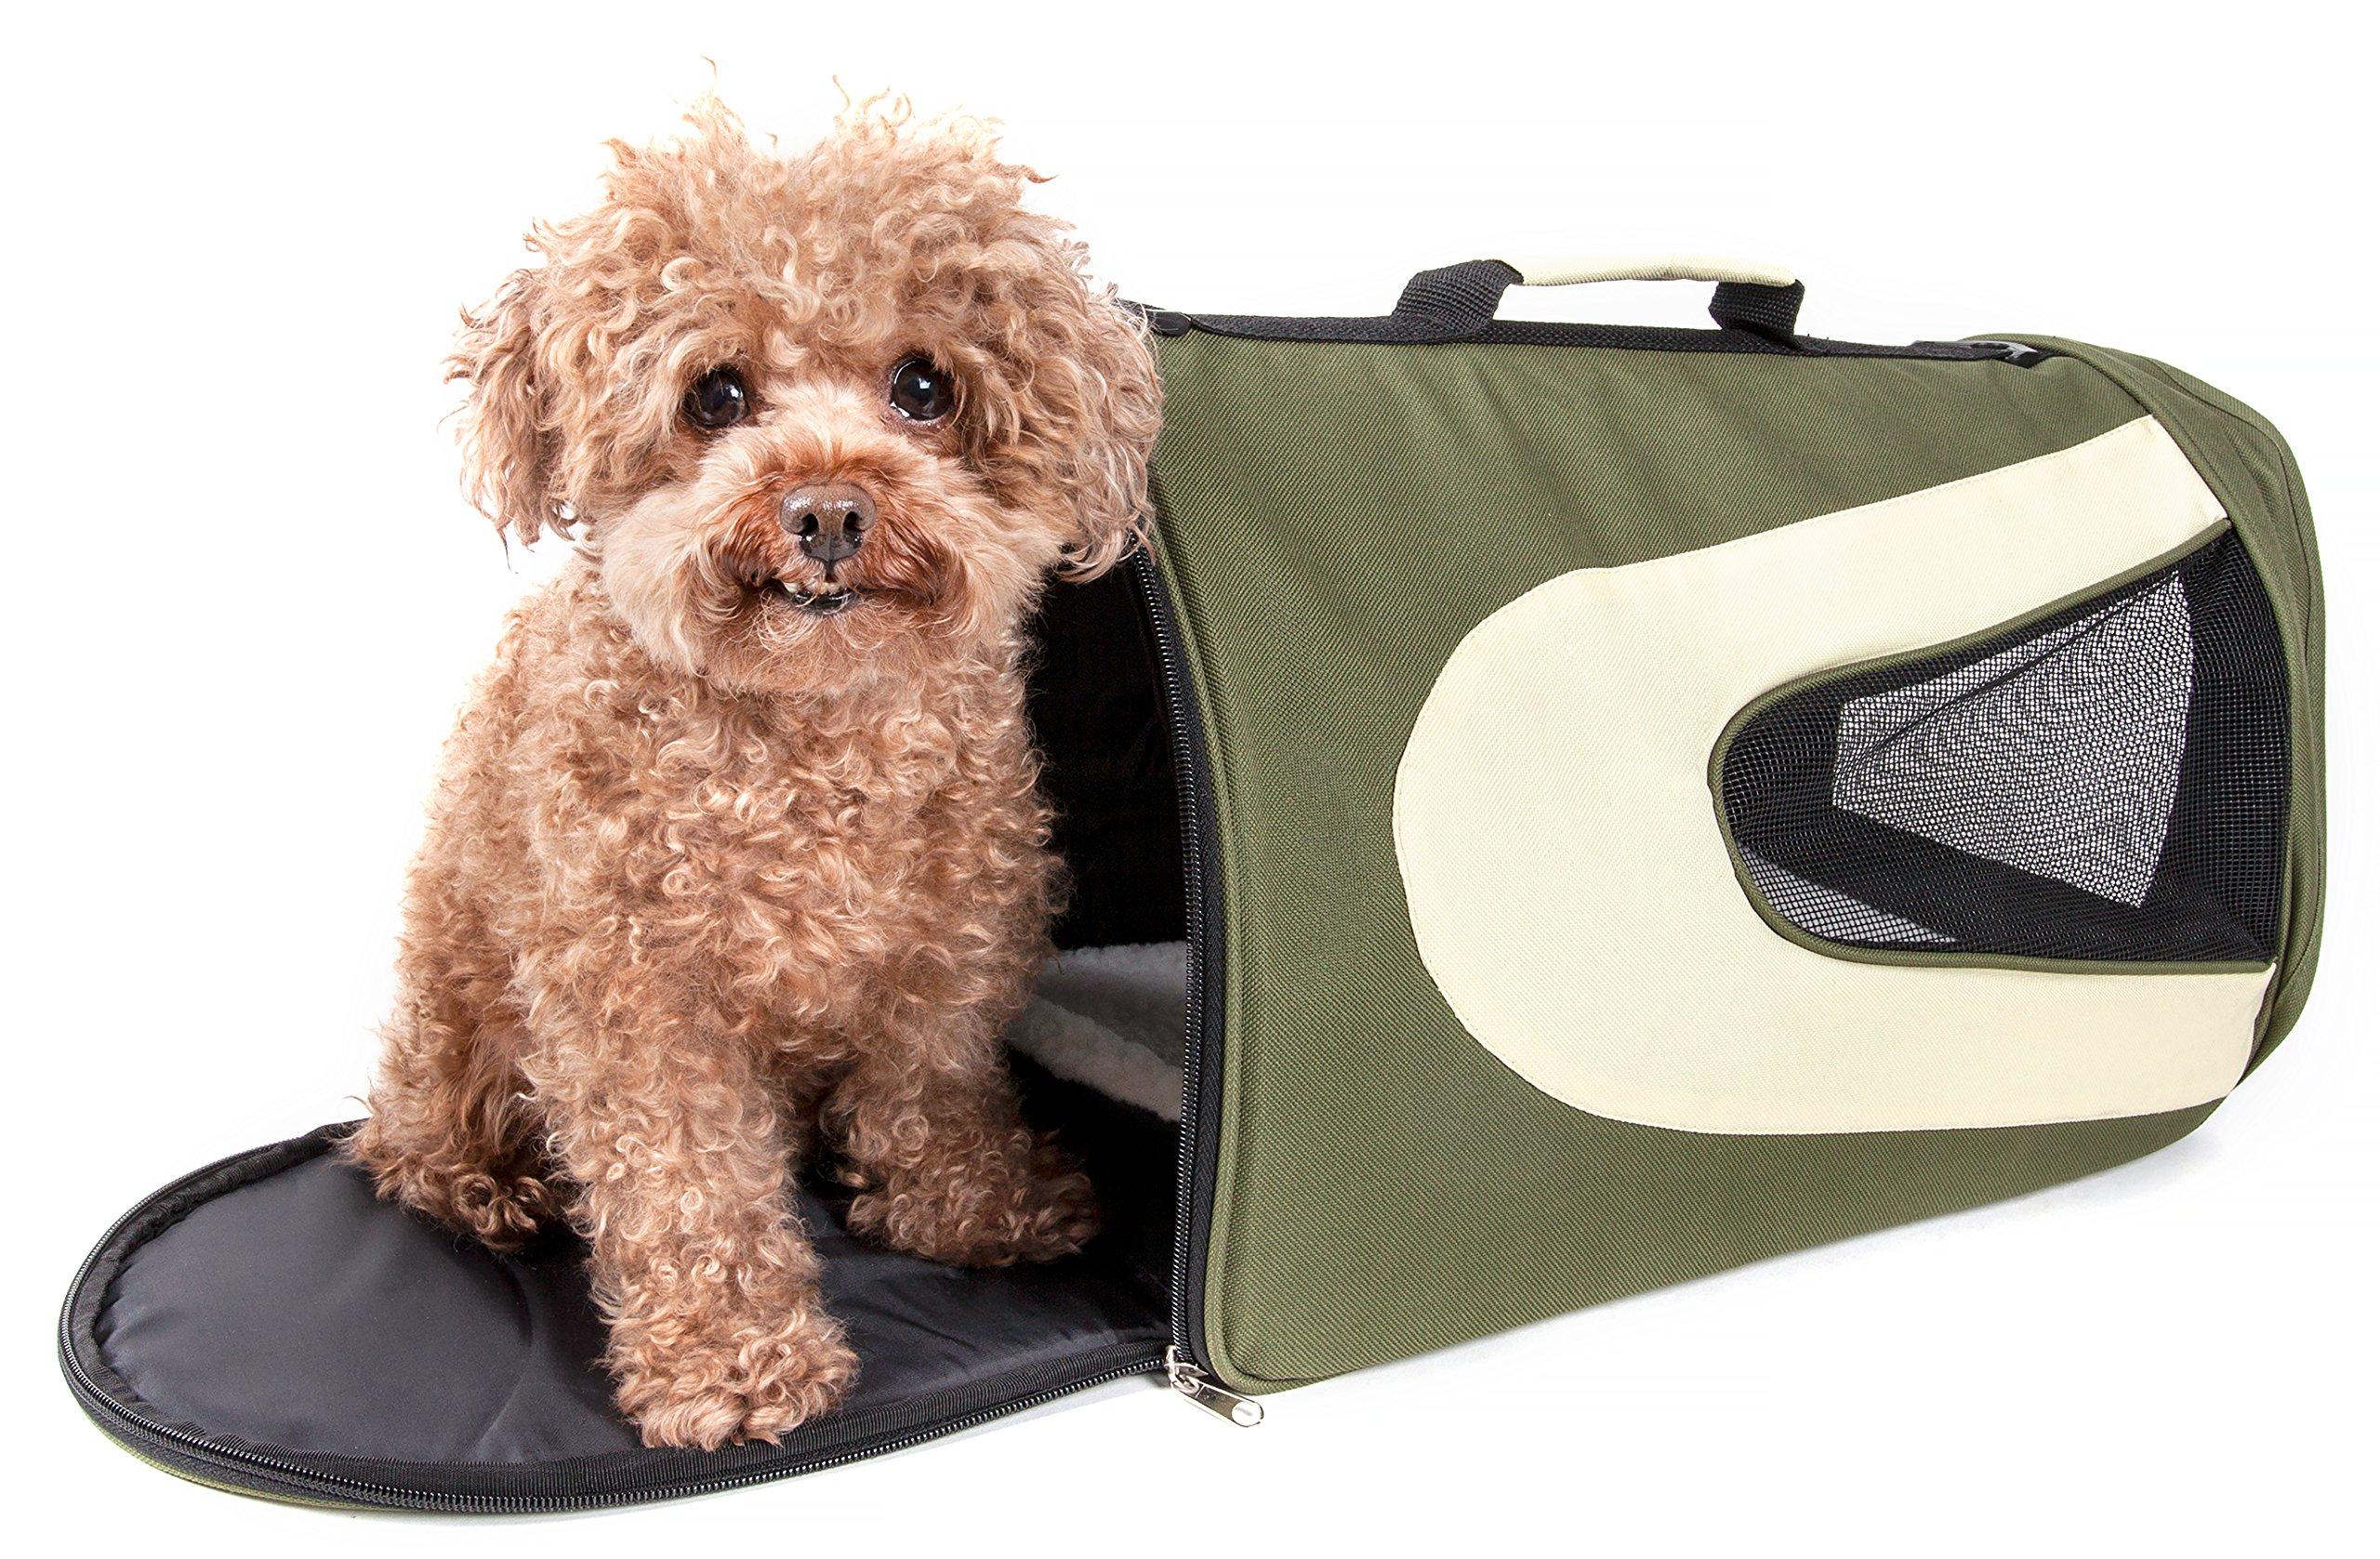 PetSpy Extra Large Pet Carrier for Small & Medium Dogs, 24x16.5x16 